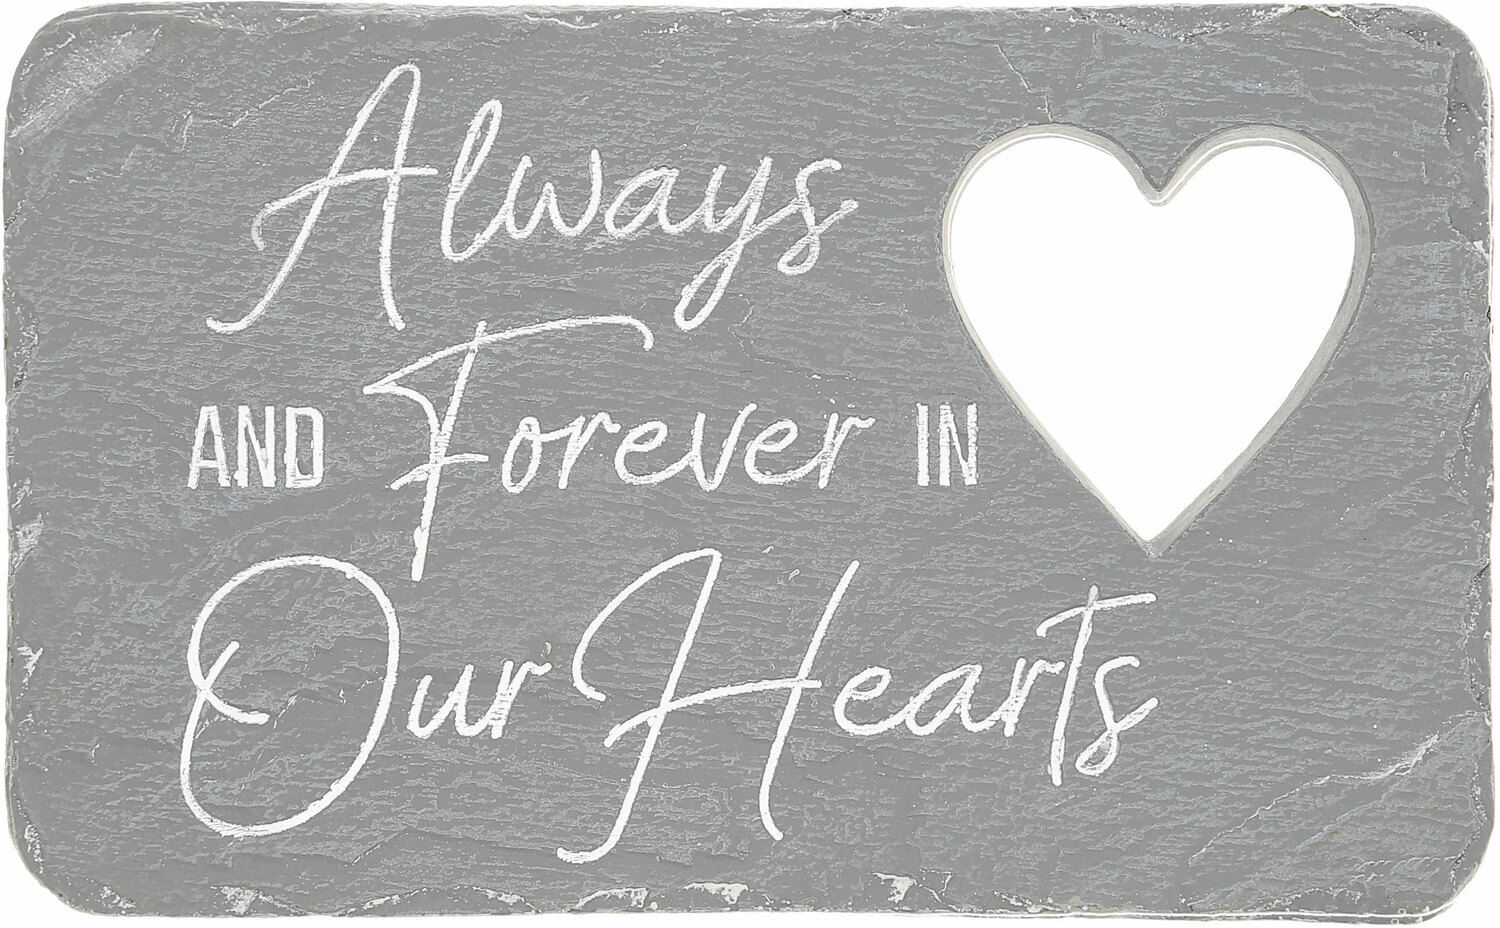 Forever In Our Hearts by Stones with Stories - Forever In Our Hearts - 7" x 4.25" Garden Stone